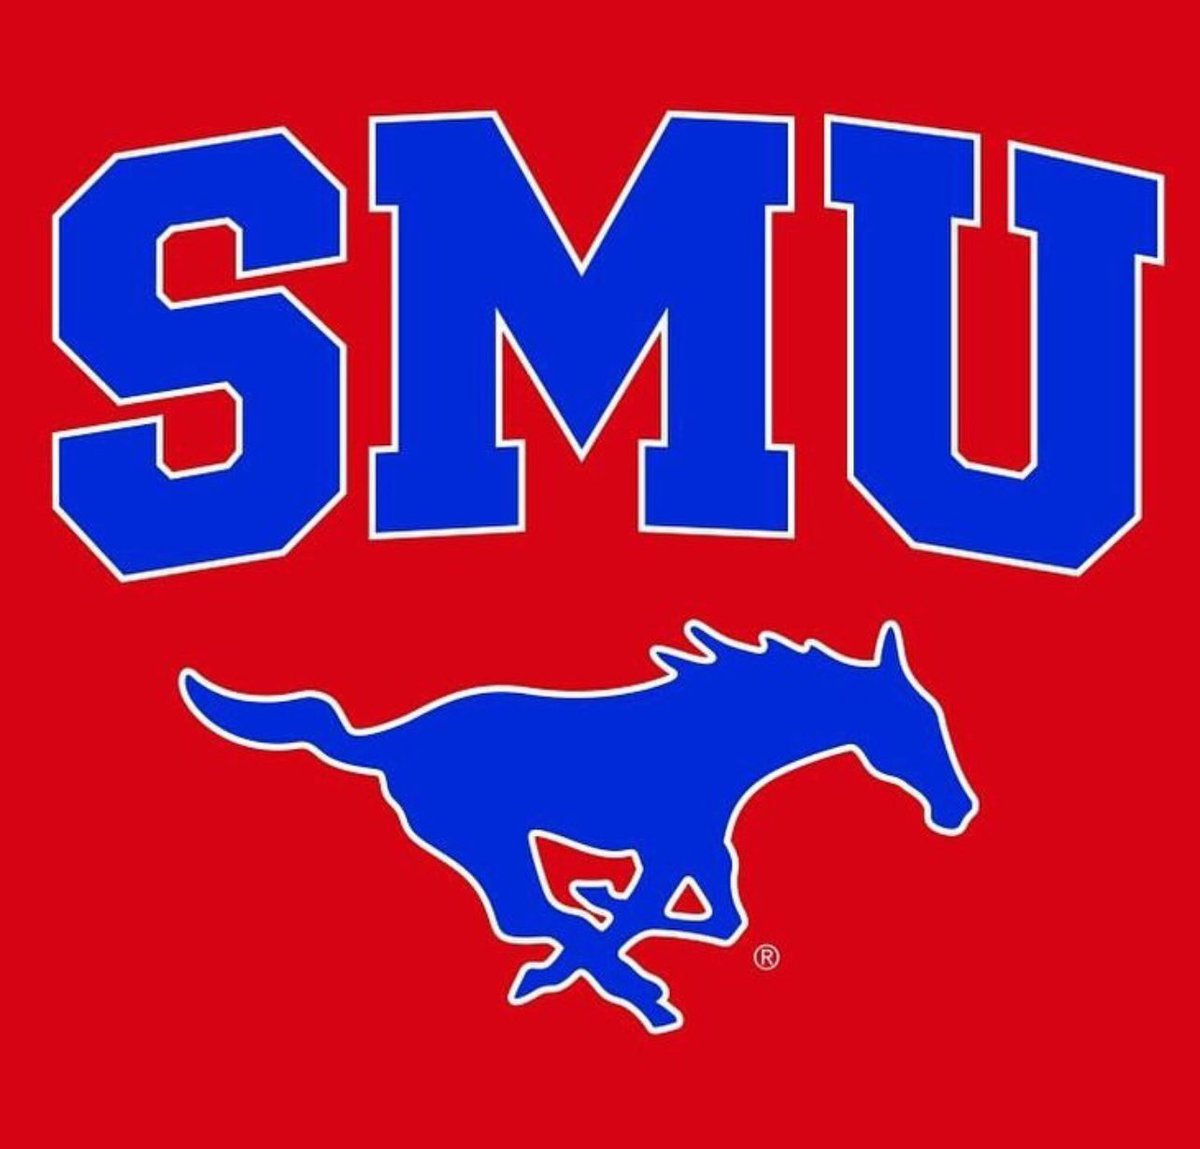 Blessed and excited to say that I’ve received an offer from Southern Methodist University @diablocjohnson @missionfootball @rhino86er @ChadSimmons_ @GregBiggins @adamgorney